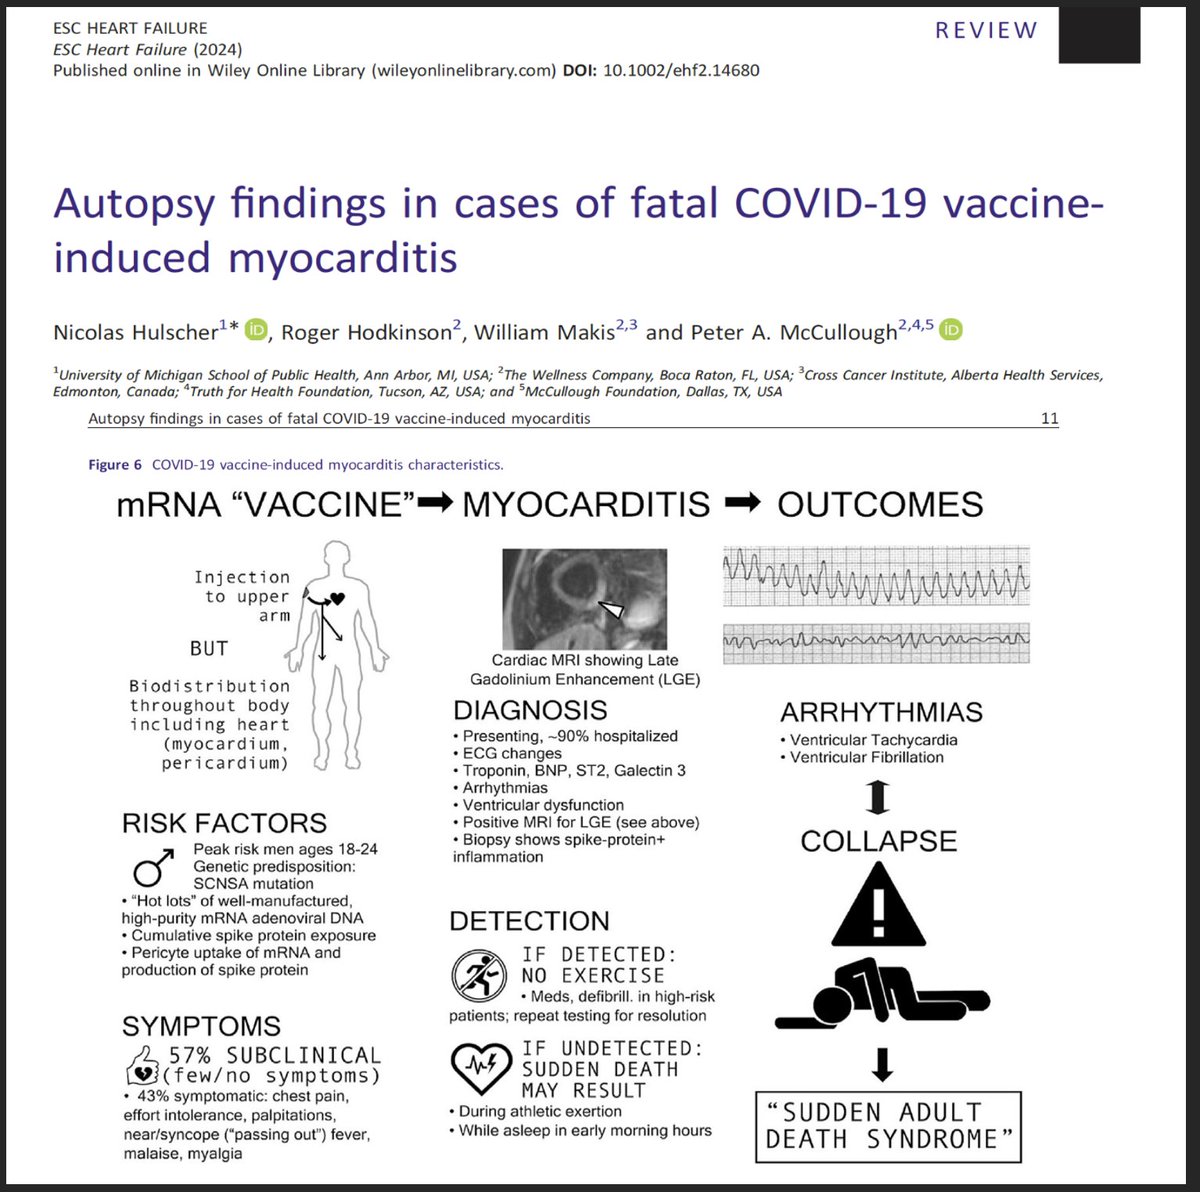 When a baby crib is recalled because there are a handful of injuries, we don't say 'but what about all the babies who were fine!' When a Covid vaccine is connected to myocarditis in hundreds of studies worldwide, our focus should not be on those who did fine, it should be on the…